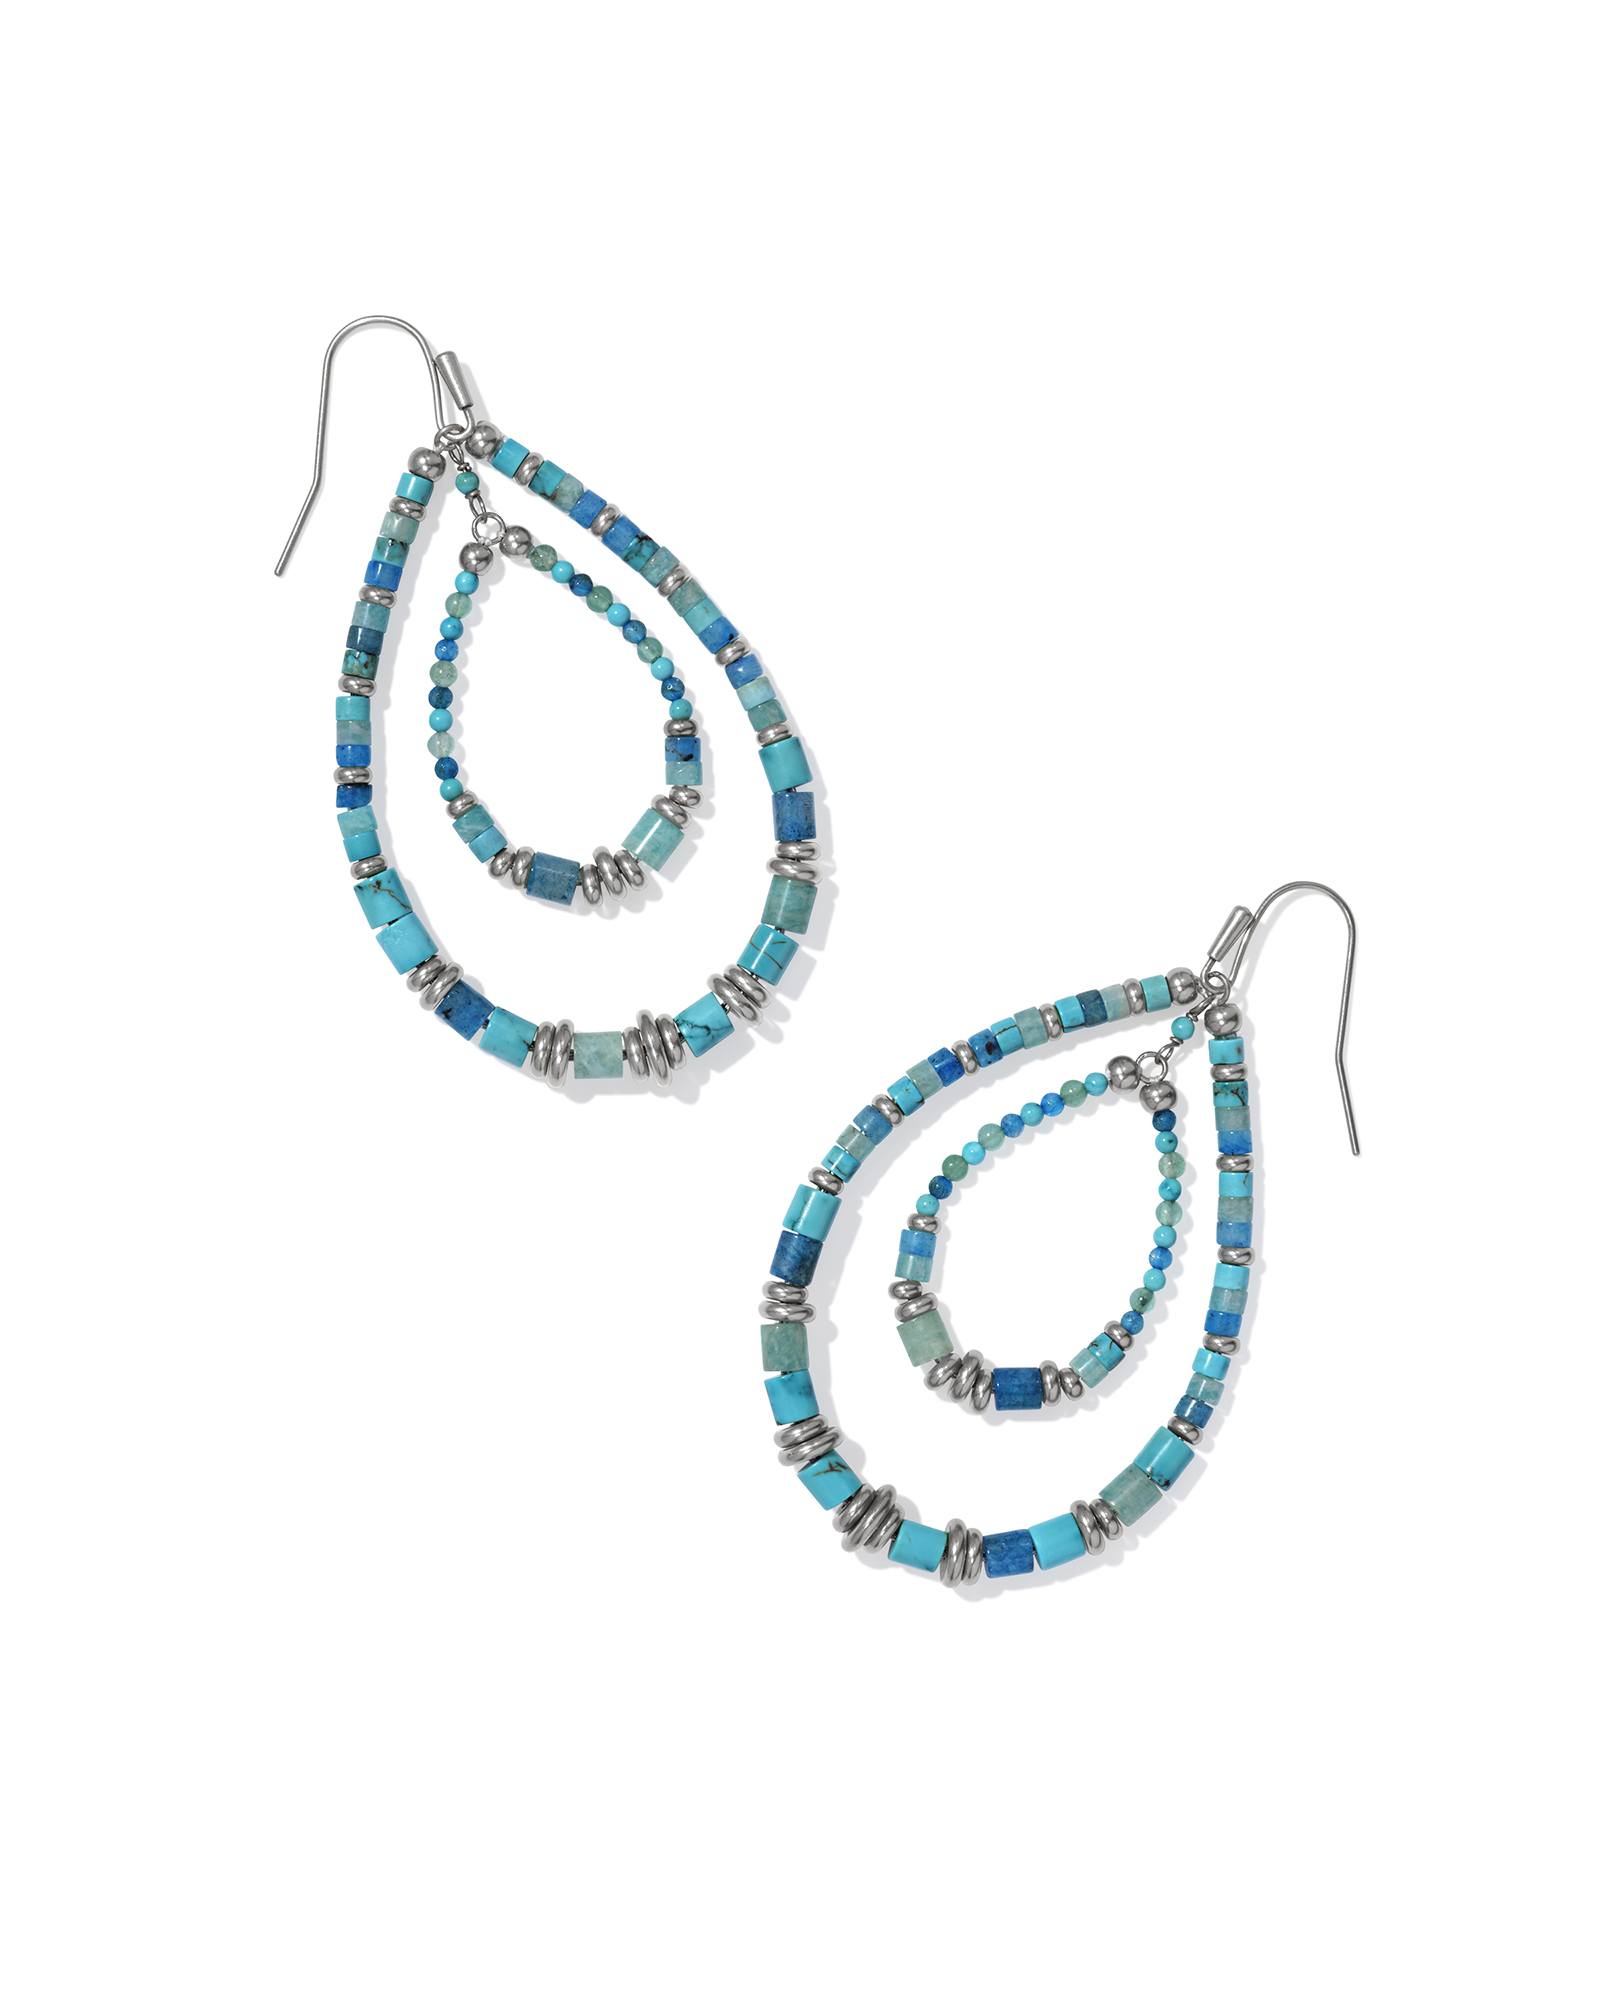 Bree Vintage Silver Open Frame Earrings in Turquoise Mix